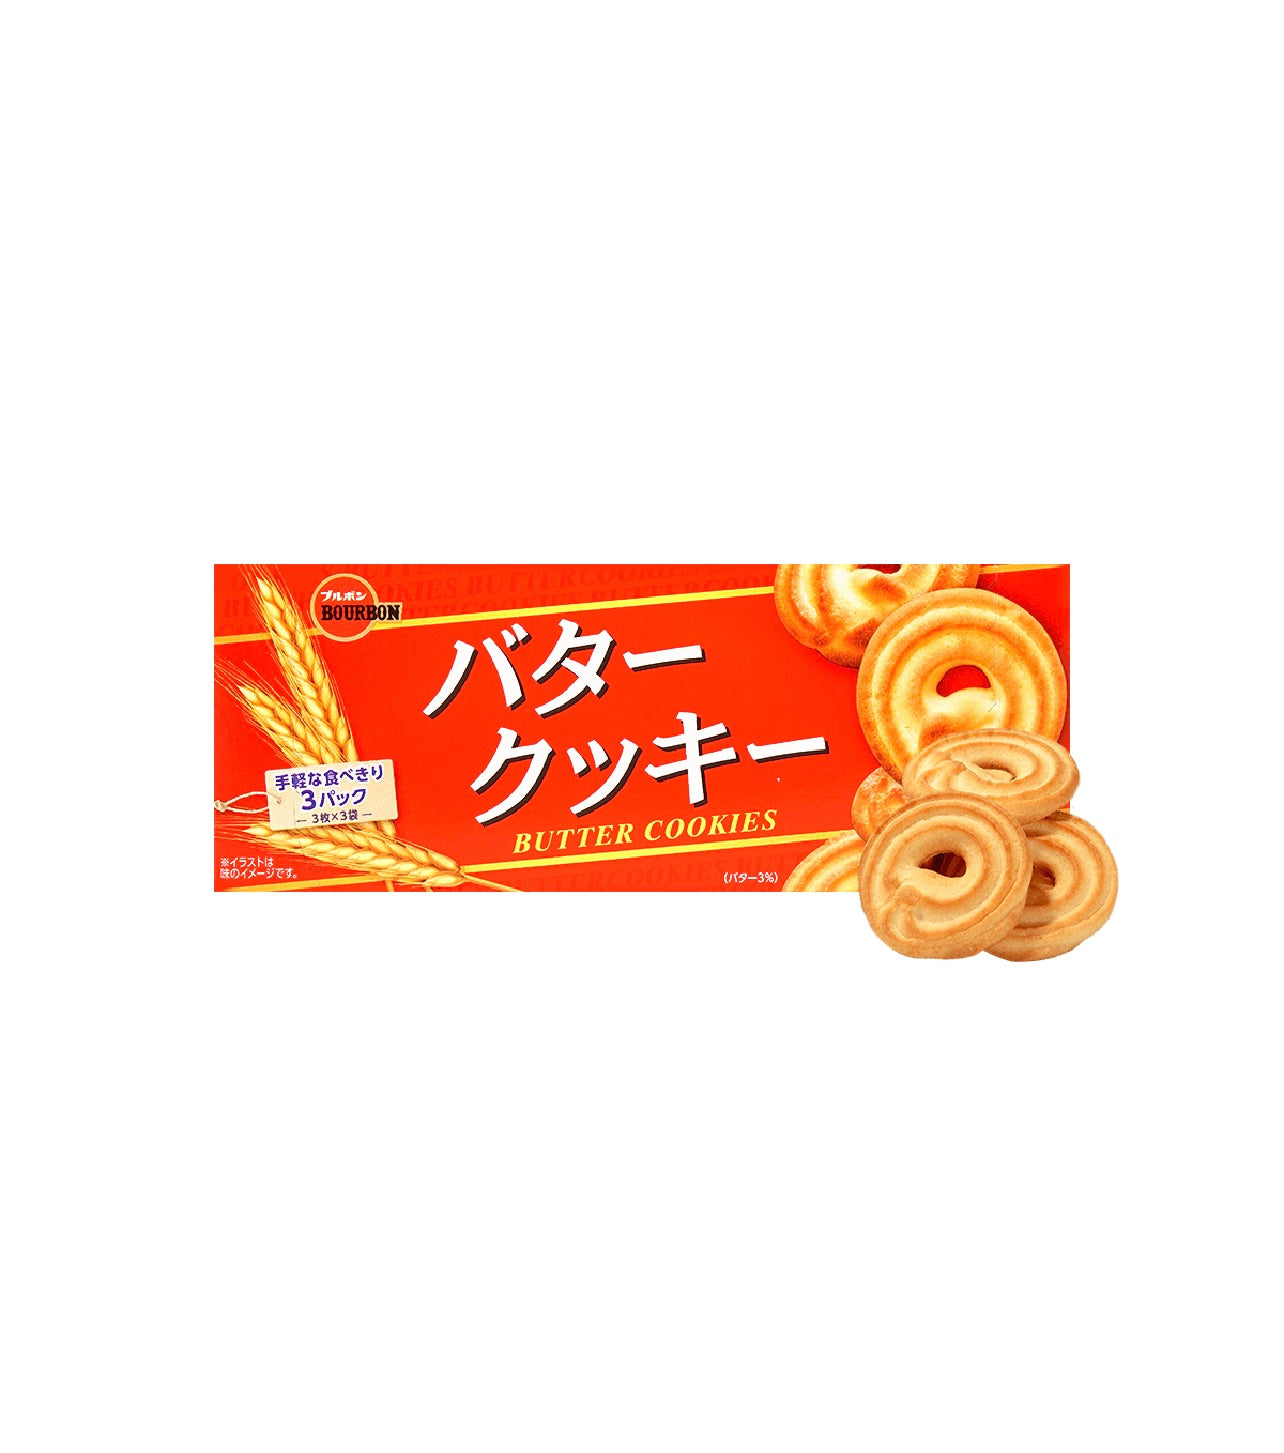 Japanese Butter Shortbread Cookies Snack, 3.17 OZ